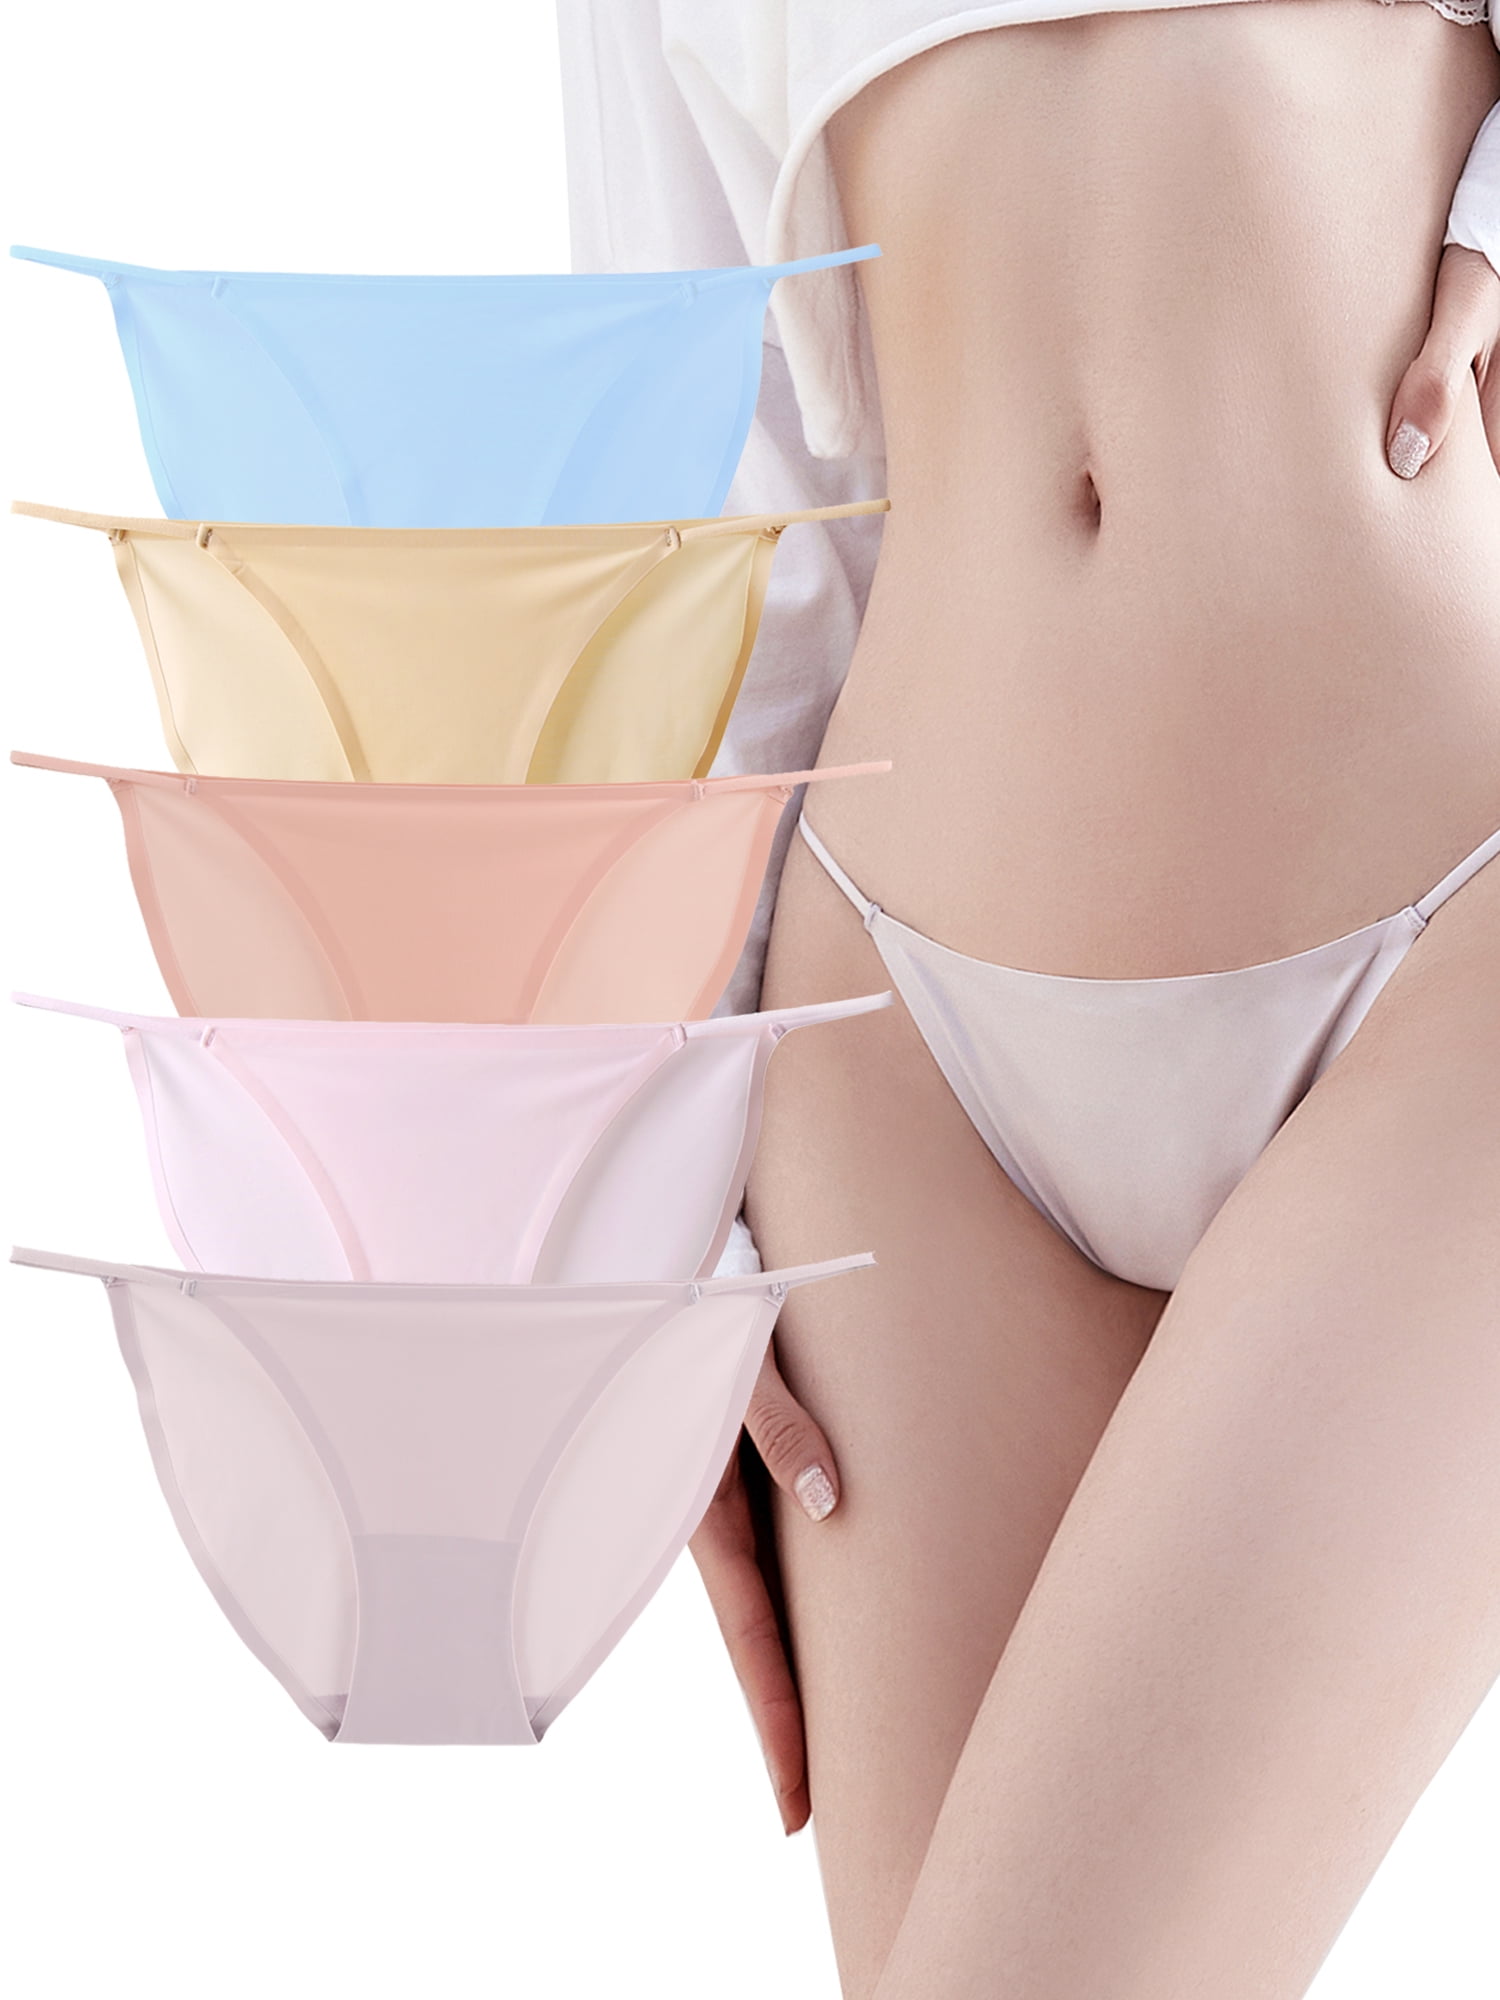 Buankoxy String Bikini Panties for Women Invisible No Show Sexy Cheeky  Panty 5 Pack,Size 6